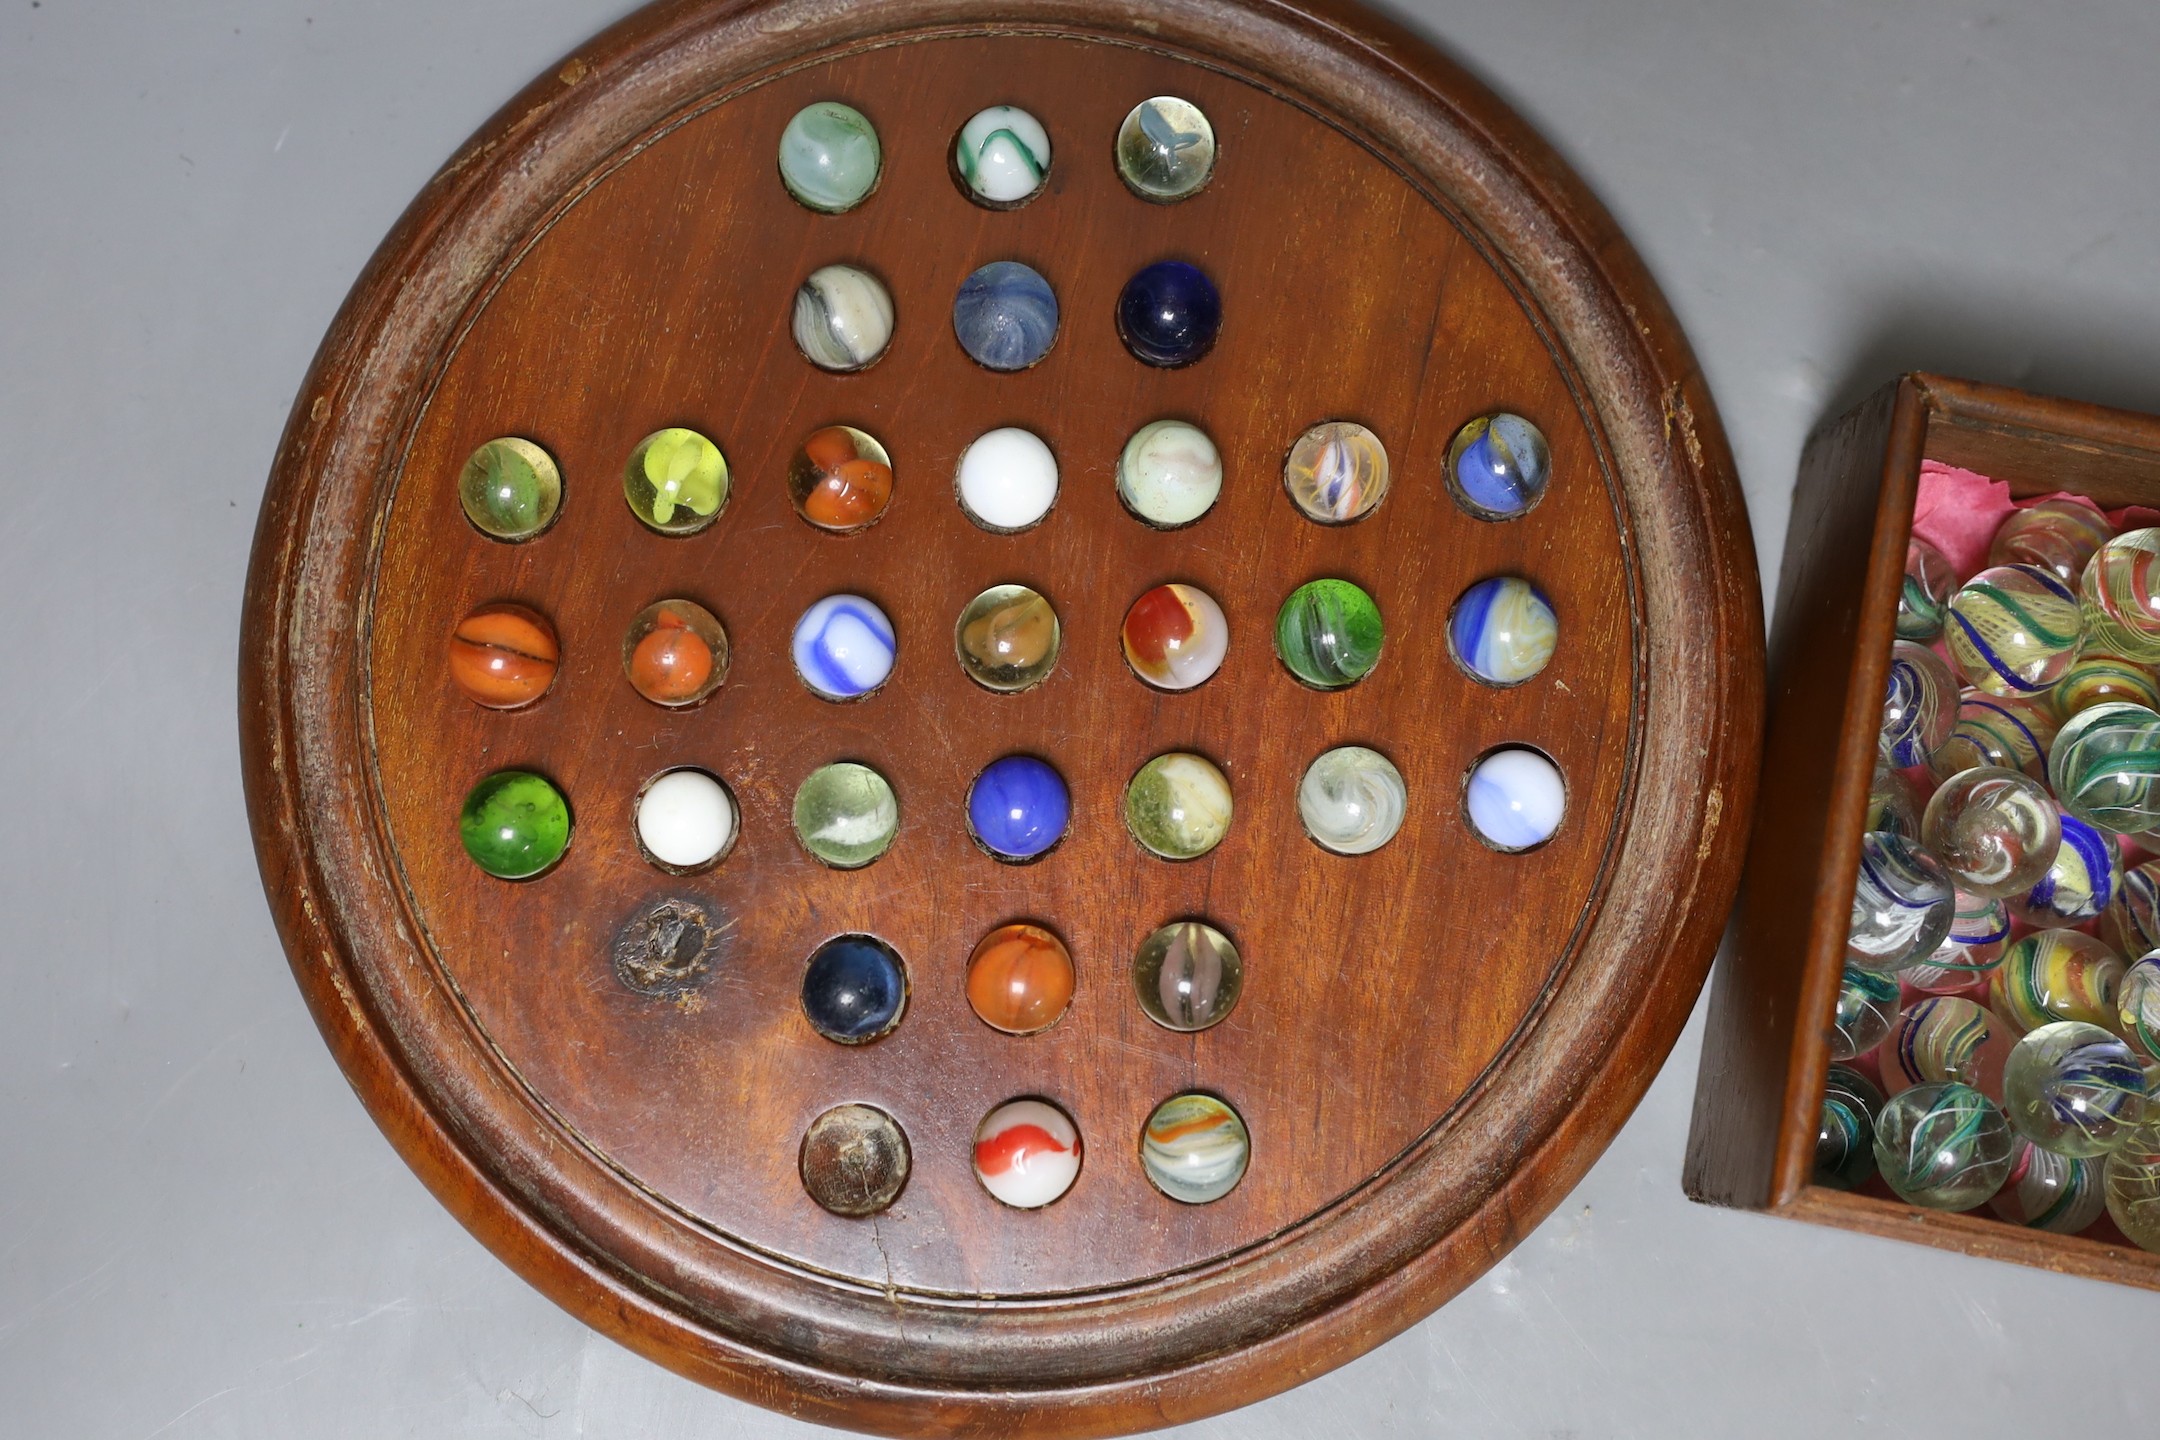 A mahogany solitaire board and marbles